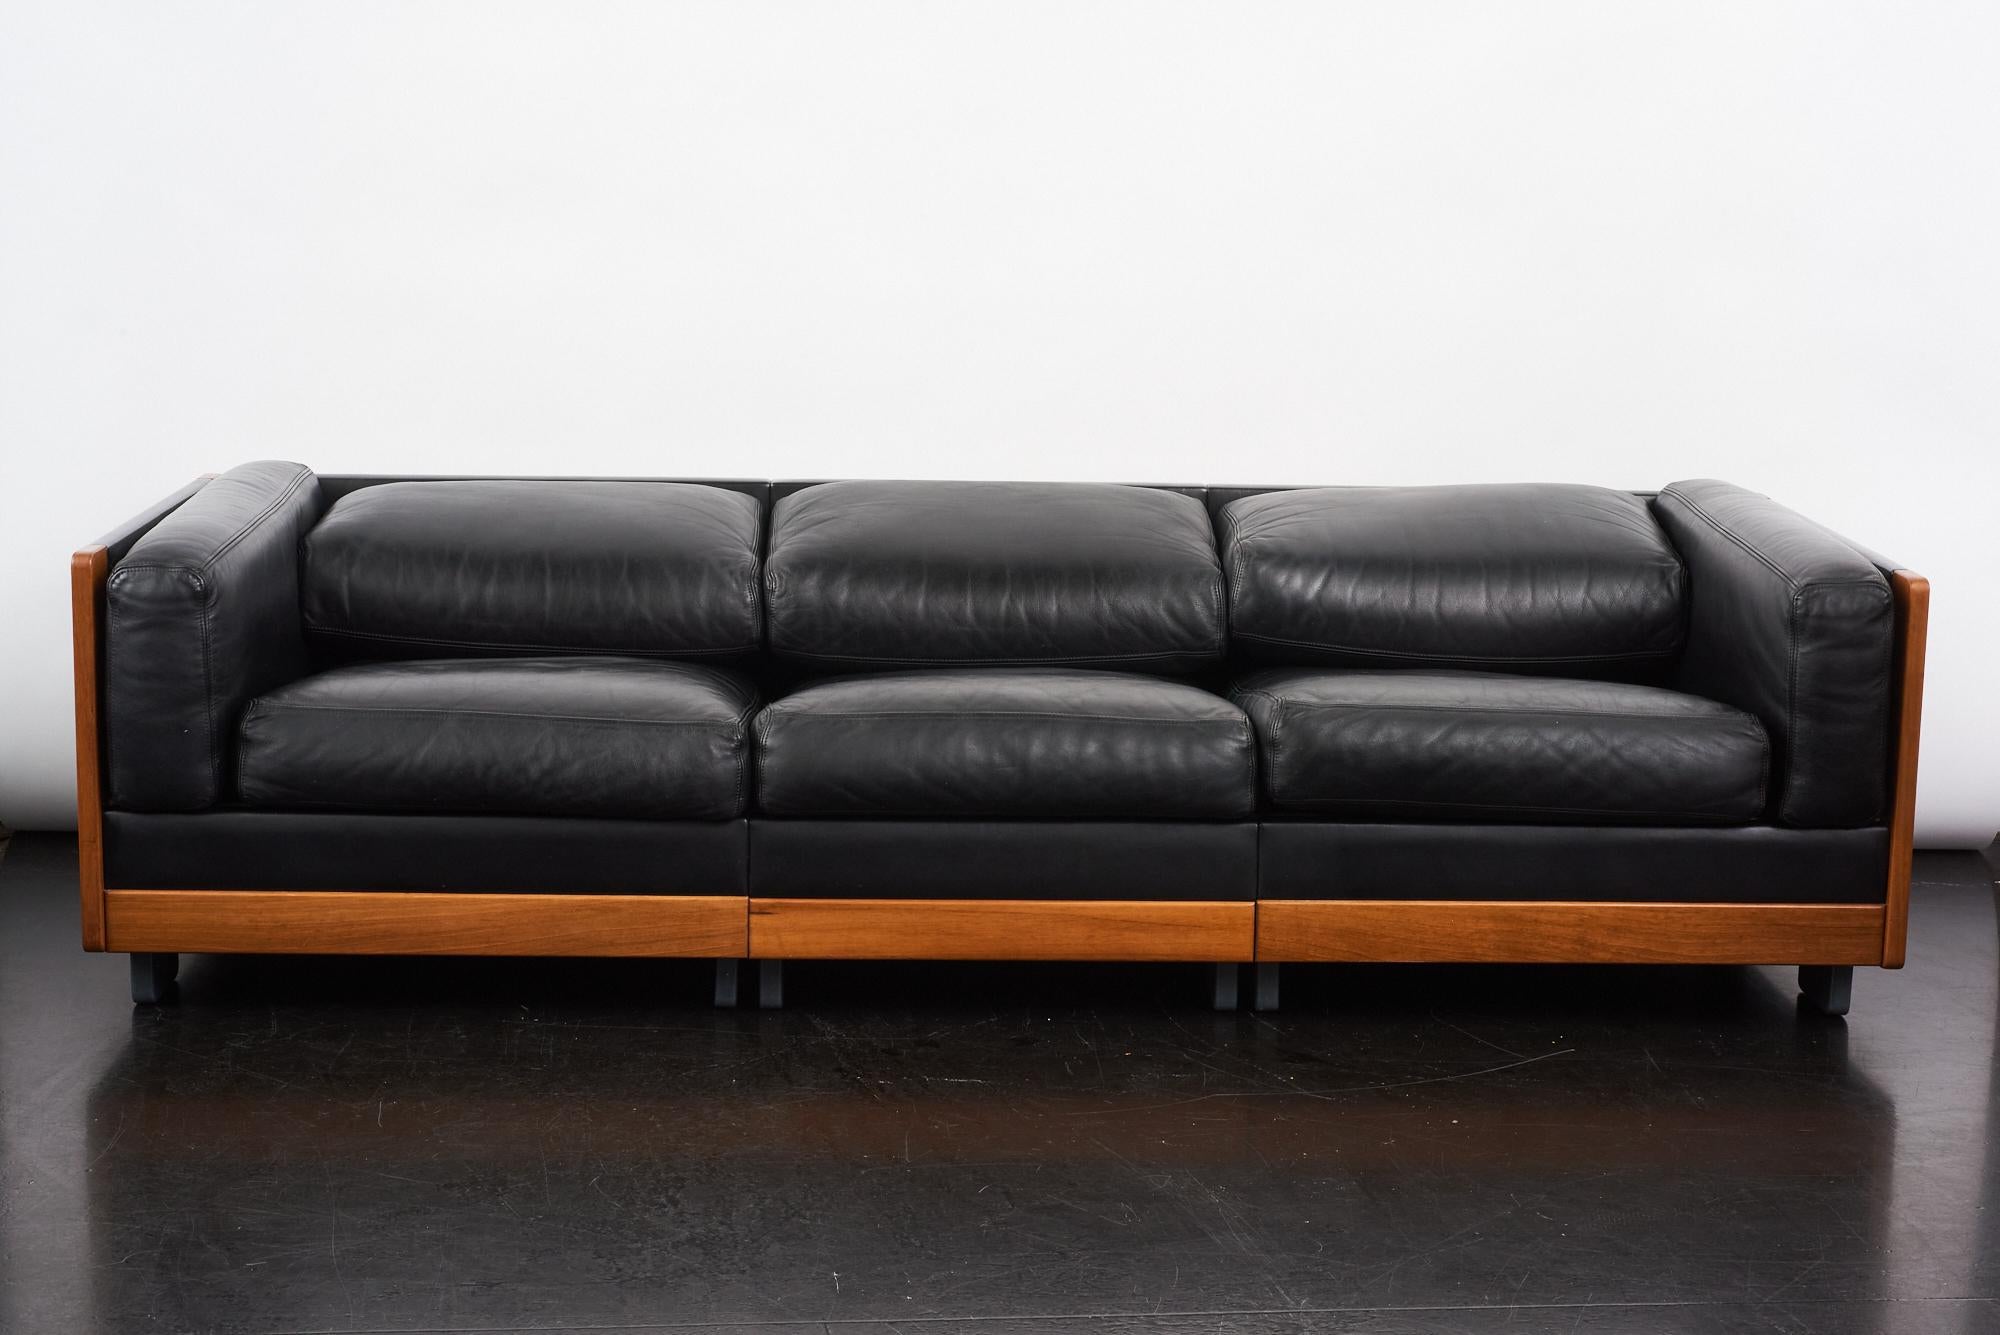 Extremely simple lined 920 walnut and leather sofa designed by Afra and Tobia Scarpa for Cassina, Italy 1964. In 1963, Afra and Tobia Scarpa started their collaboration with the Italian manufacturer Figli di Amedeo Cassina, designing an iconic